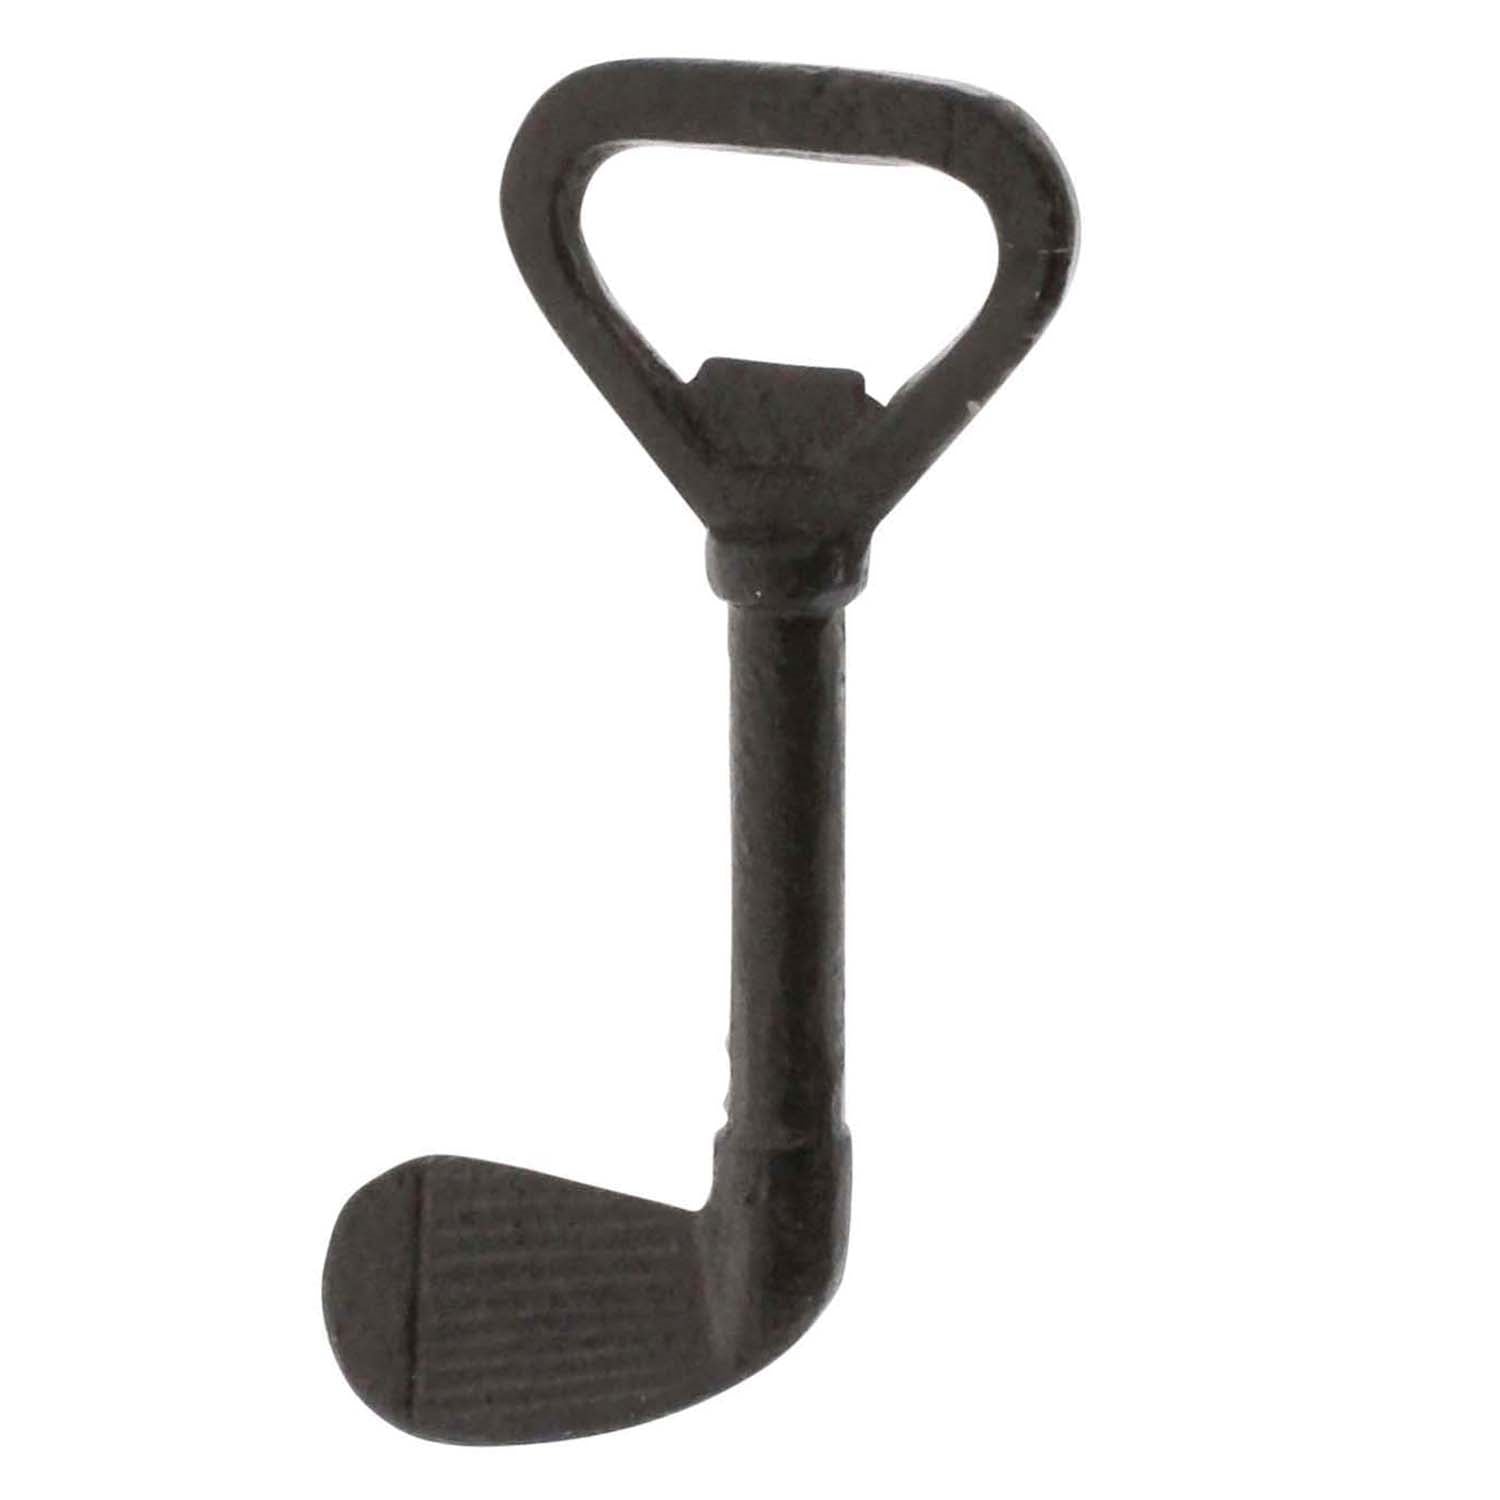 Image of a cast iron golf club bottle opener.